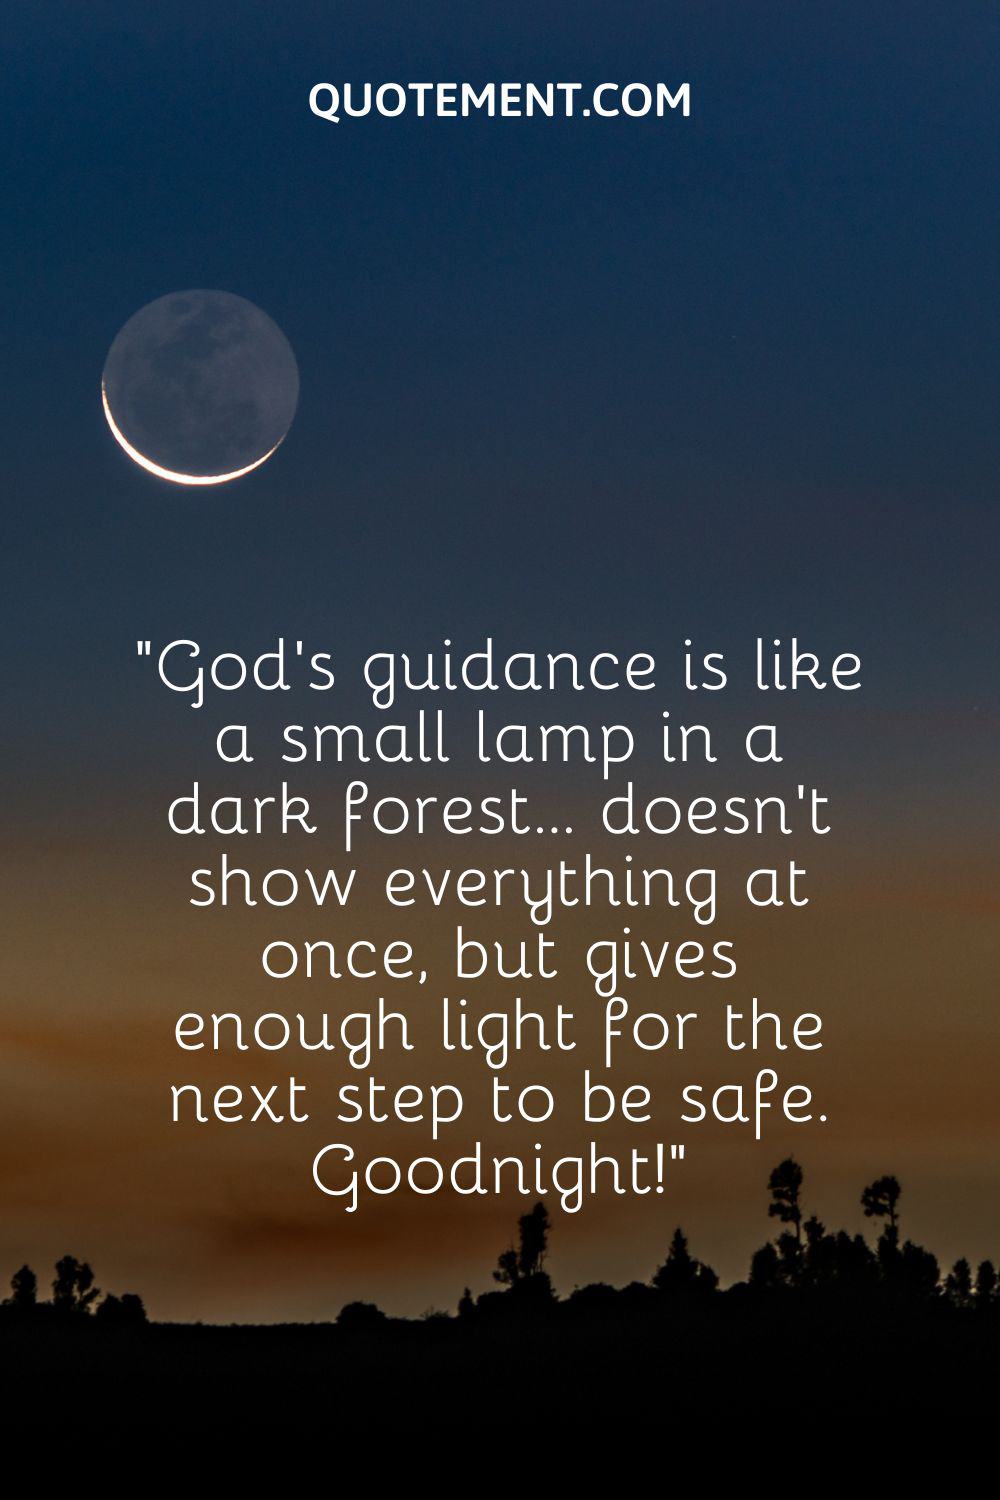 God’s guidance is like a small lamp in a dark forest doesn’t show everything at once